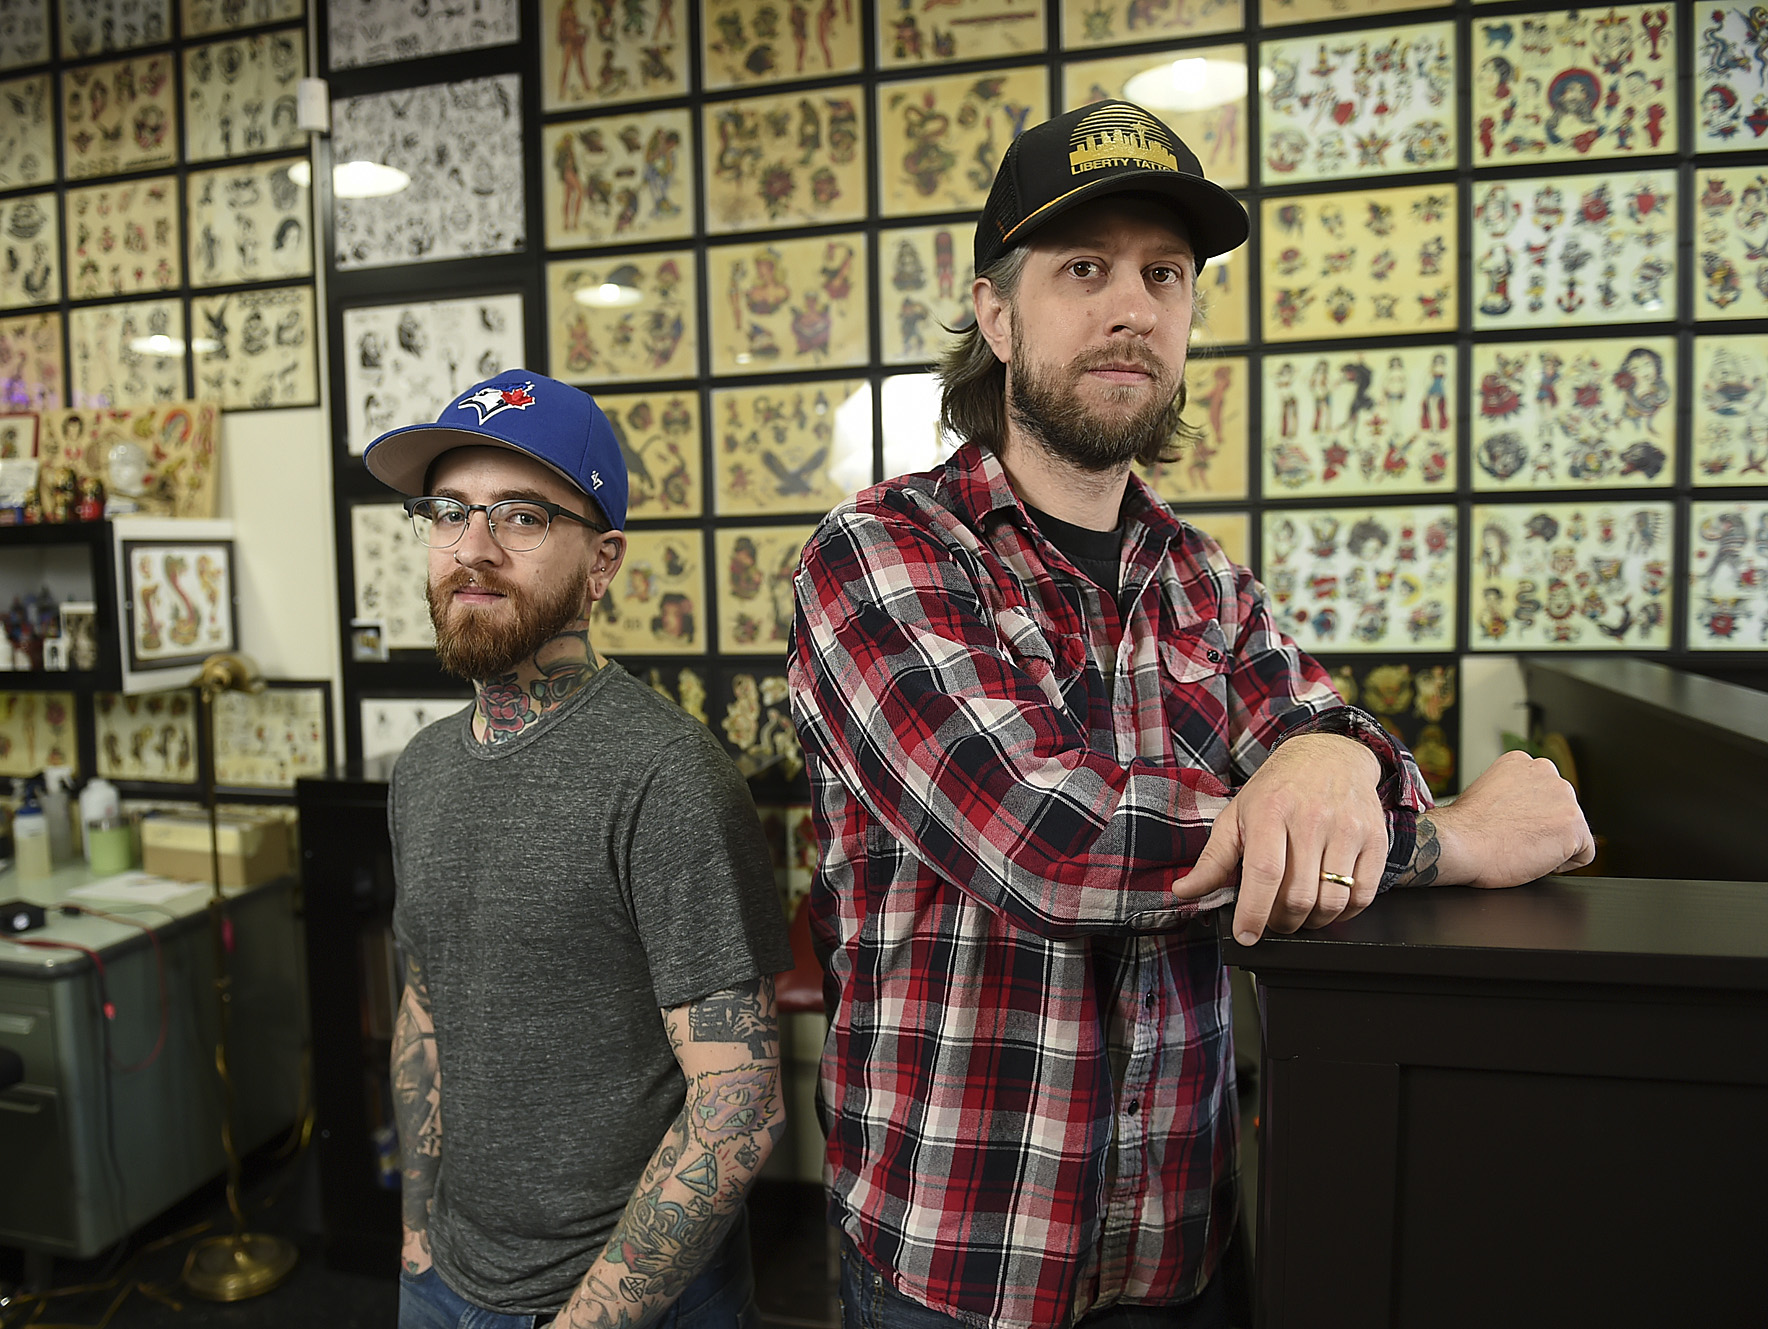 Palace Tattoo brings history to Hastings - Vancouver Is Awesome